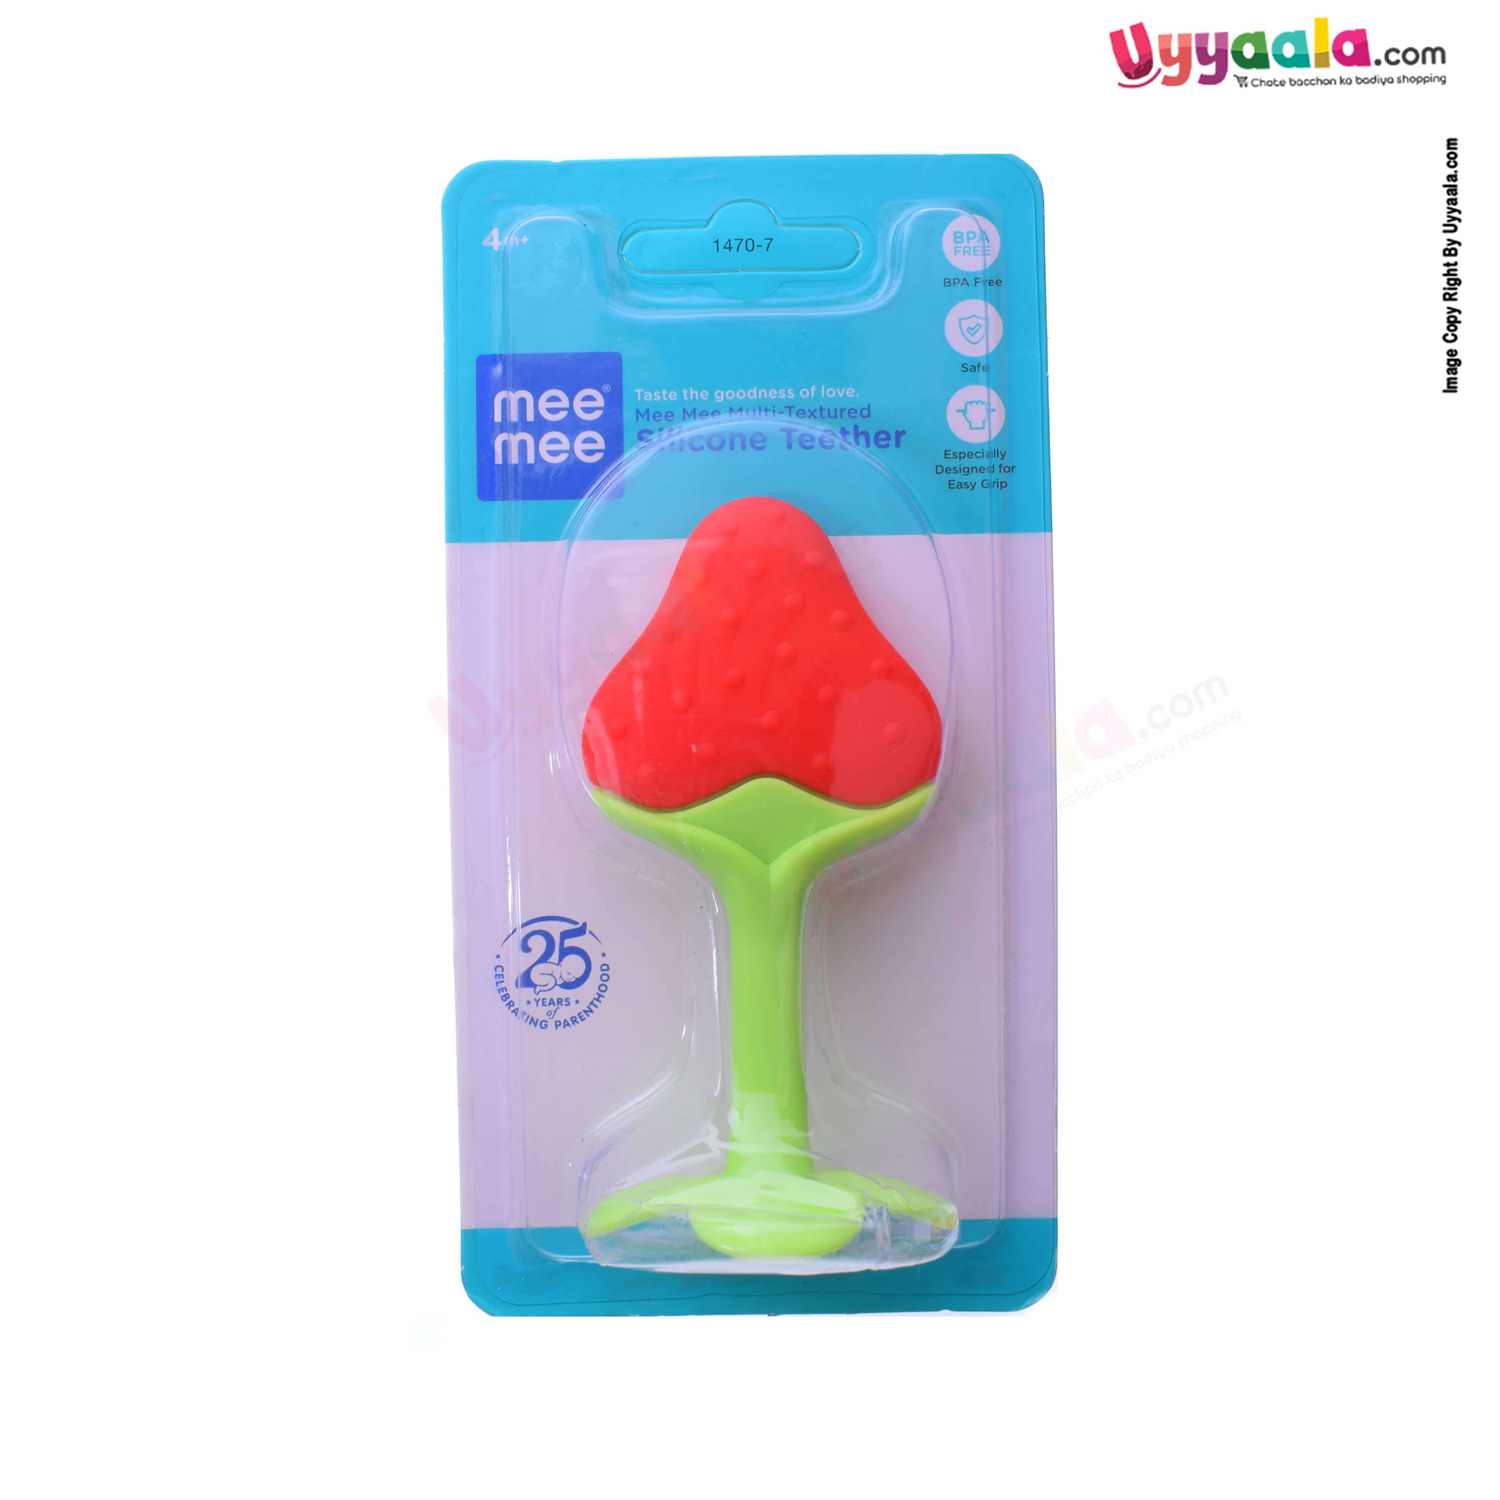 MEE MEE Silicone Textured Teether For Babies 4+m Age - Red, Green